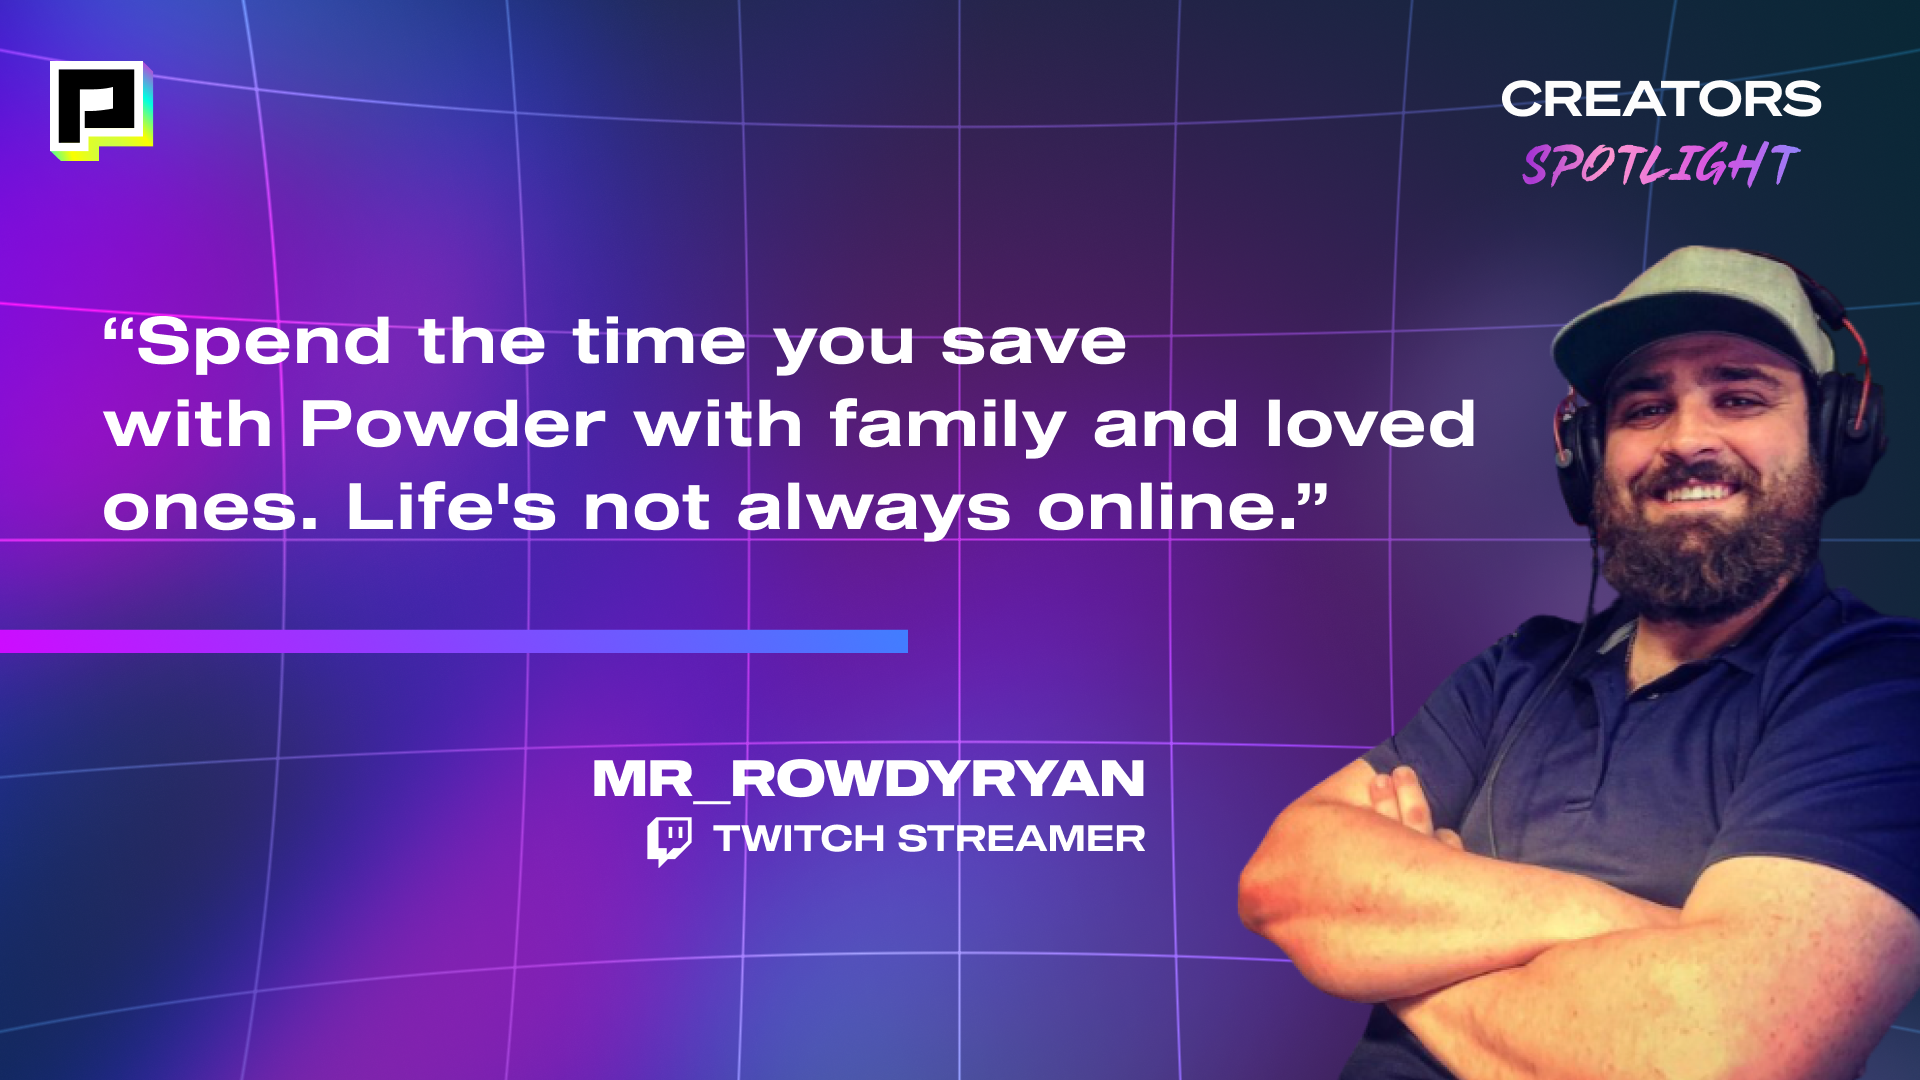 Image of Twitch Streamer, MR_ROWDYRYAN with his quote, "Spend the time you save with Powder with family and loved ones. Life's not always online."